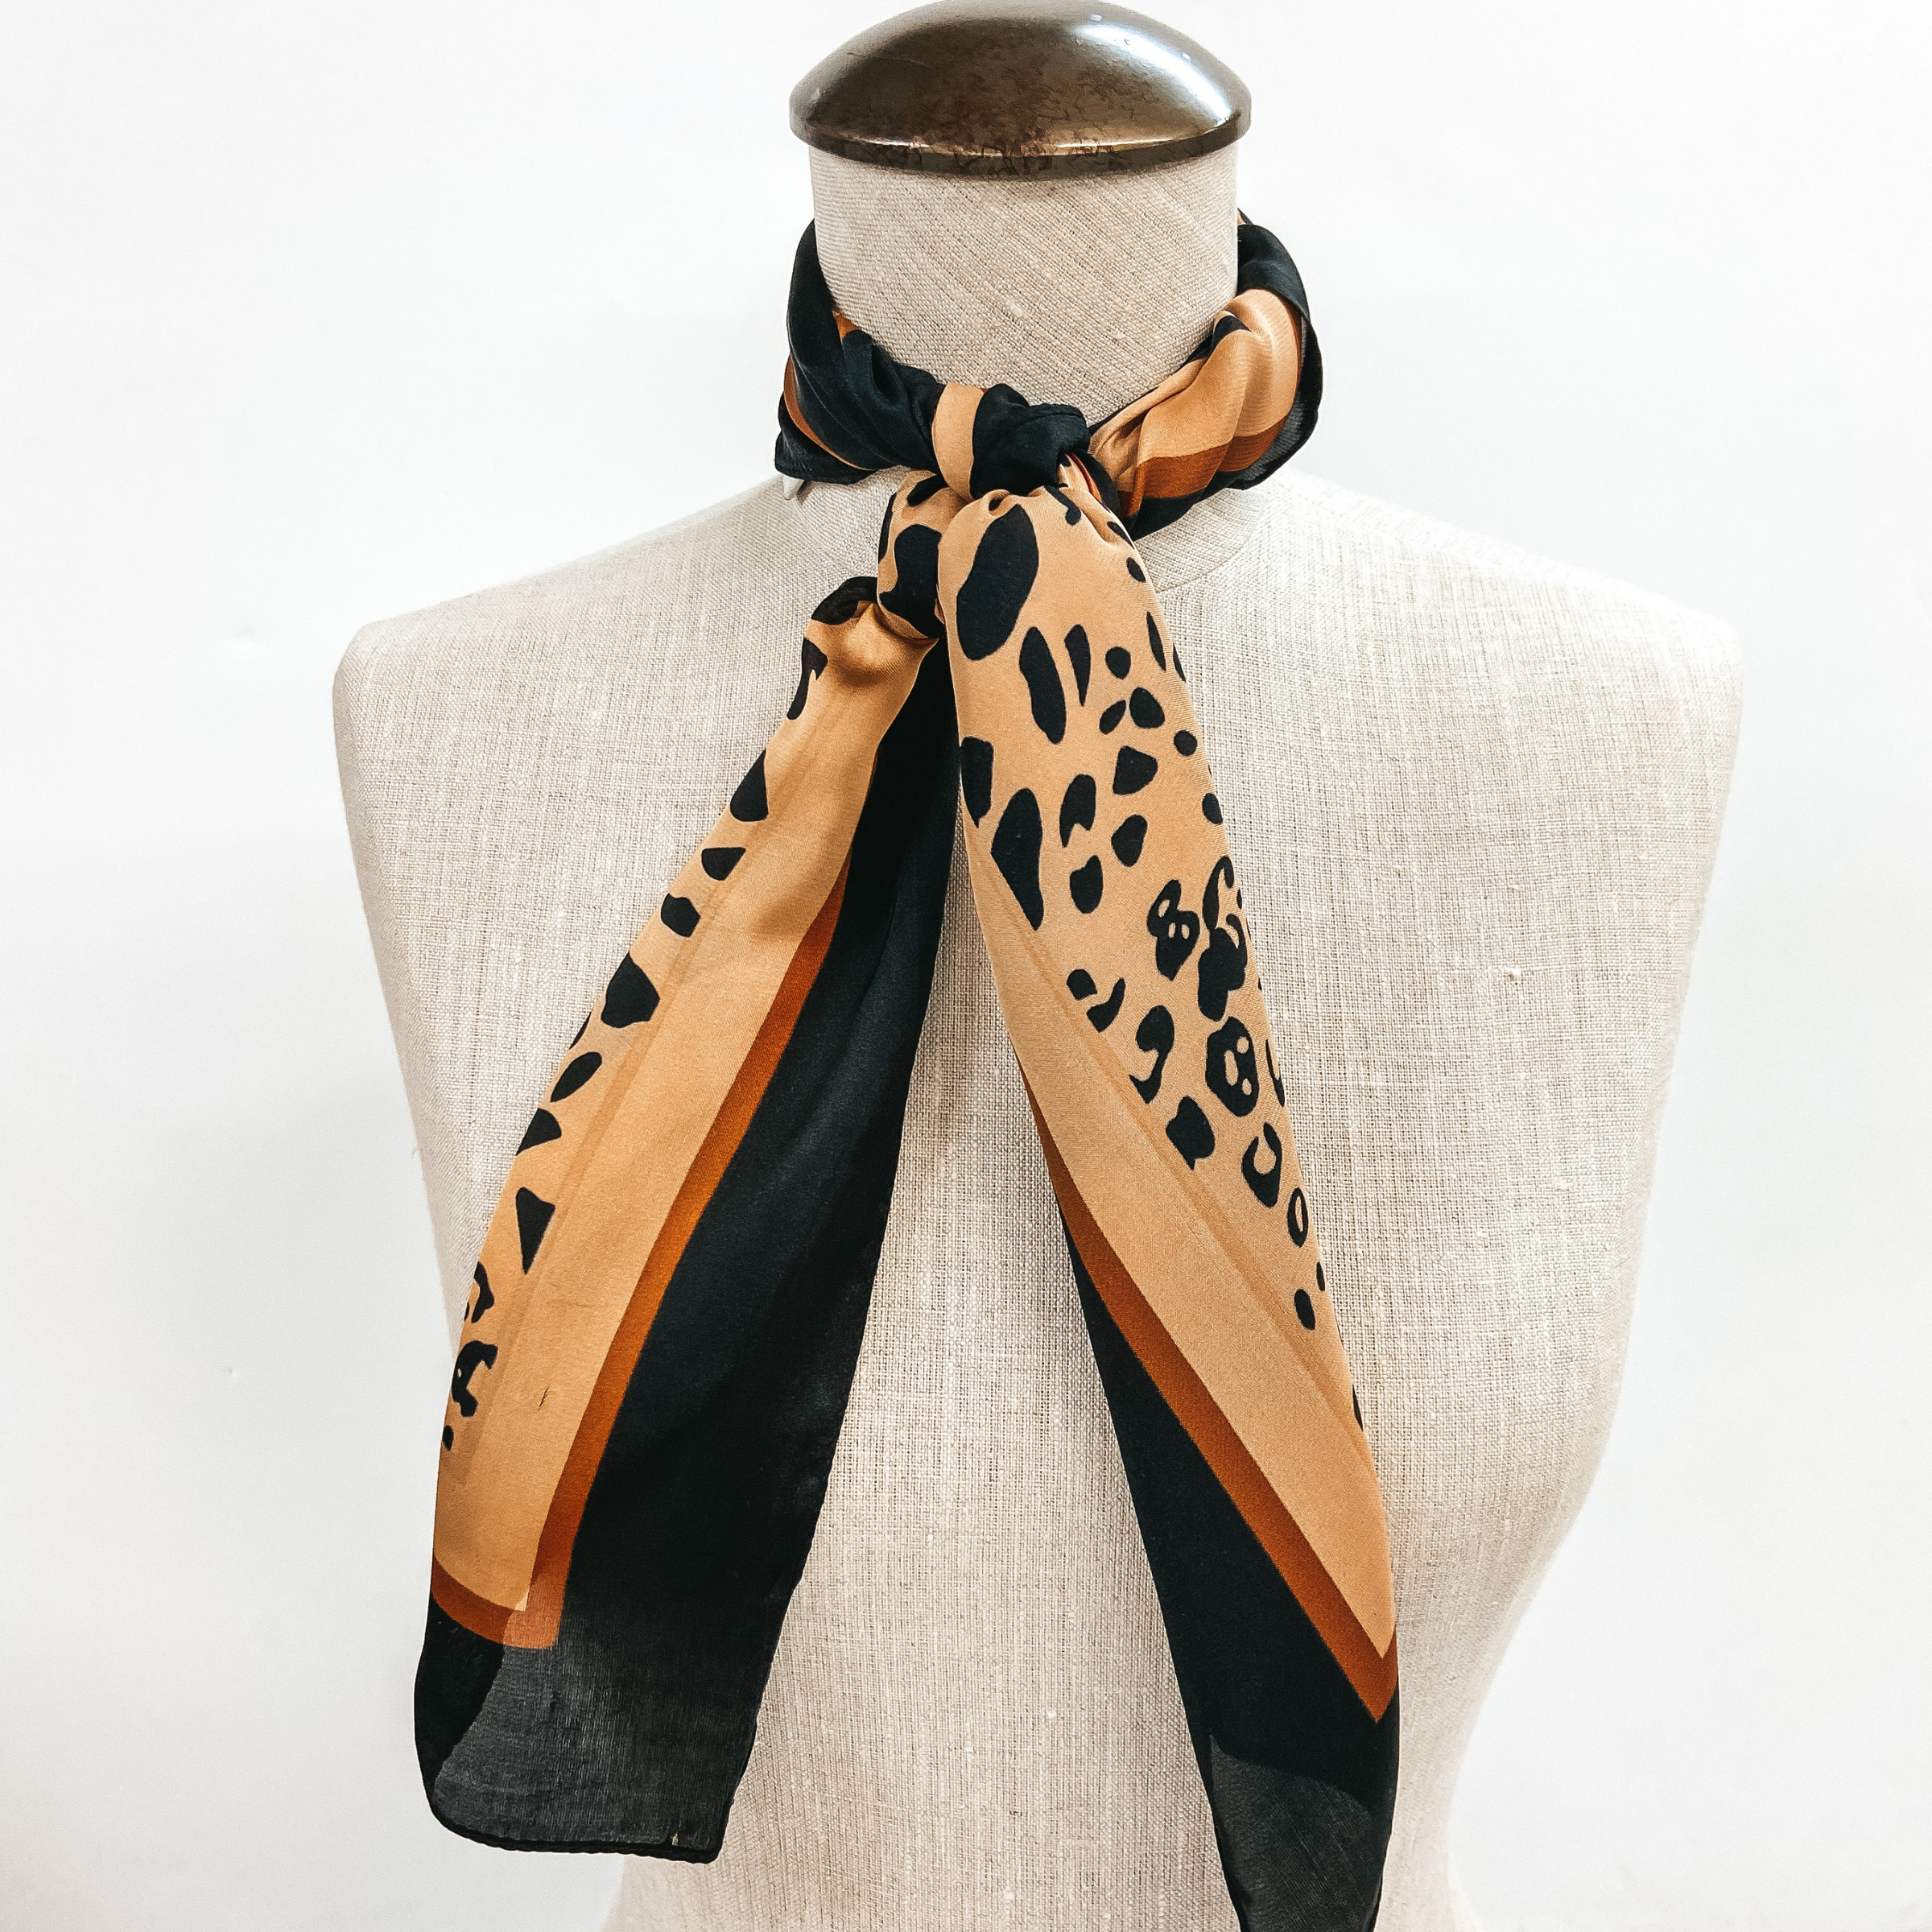 Mixed Animal Print Square Scarf in Tan and Black - Giddy Up Glamour Boutique